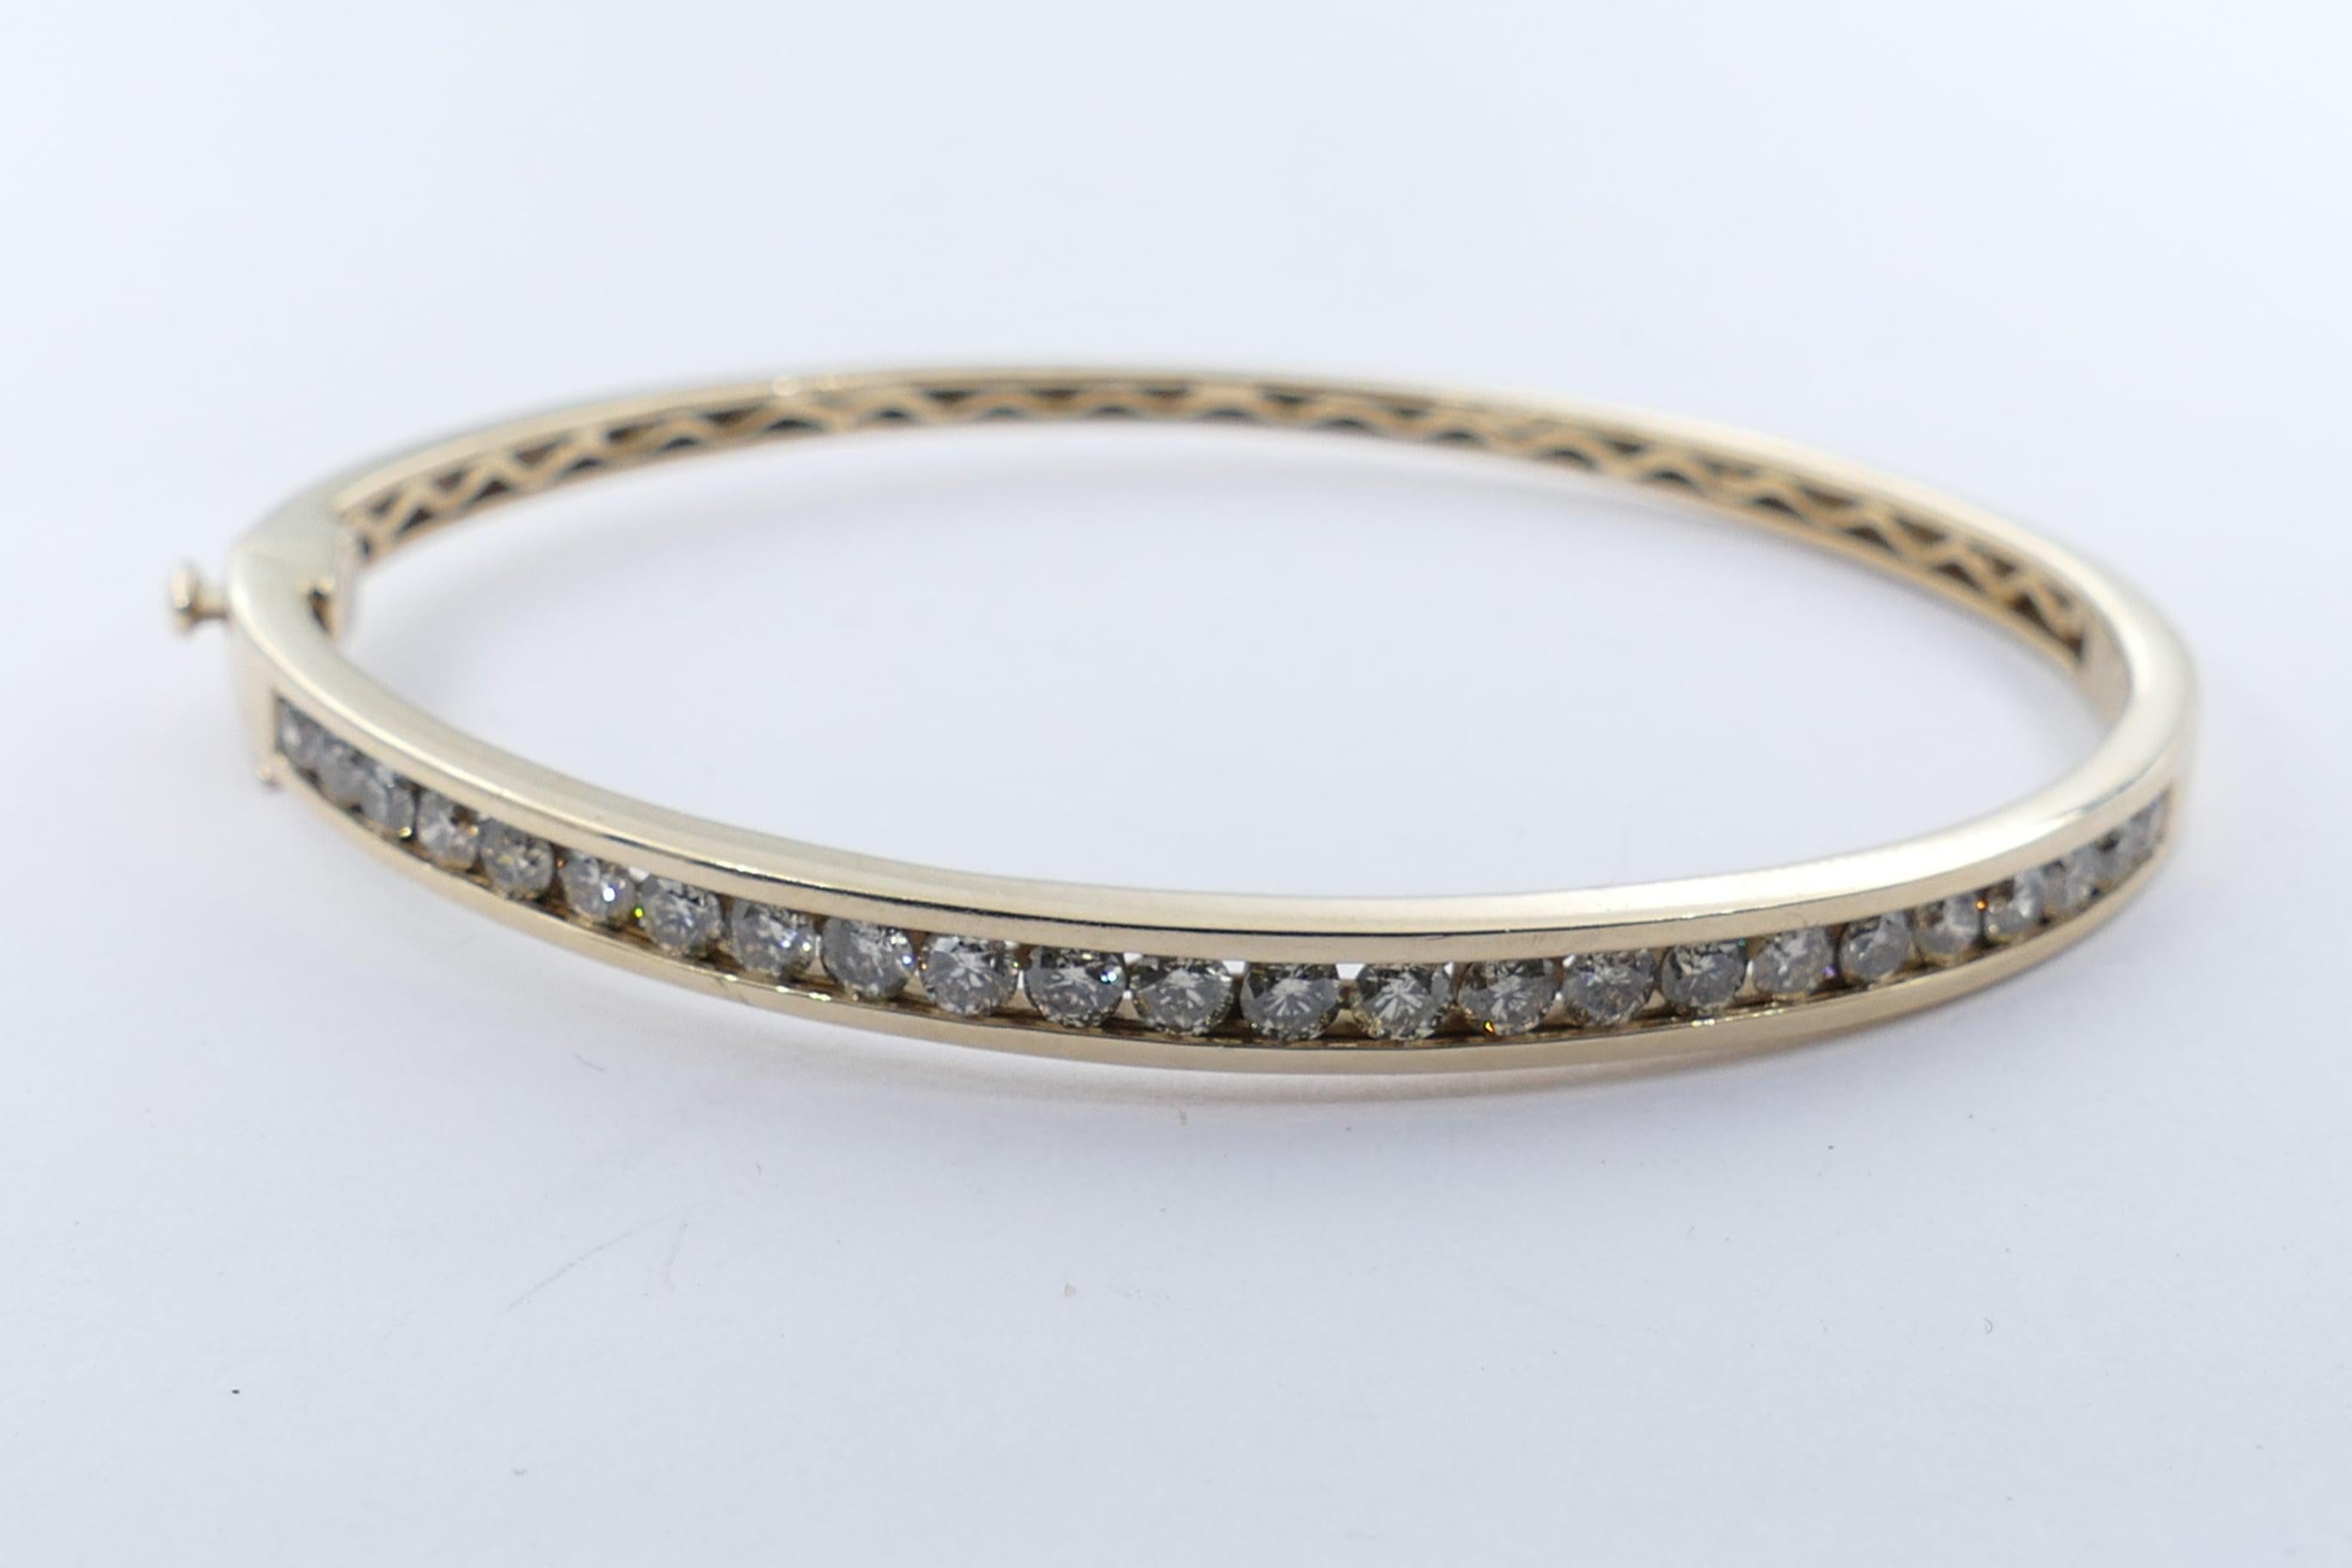 This lovely Dress Bangle is composed of 24 round brilliant cut Diamonds  totalling a weight of 2.50 carats.
Very pretty fancy light brown is the colour mentioned for the Diamonds but they do actually look a lot lighter than that would indicate.